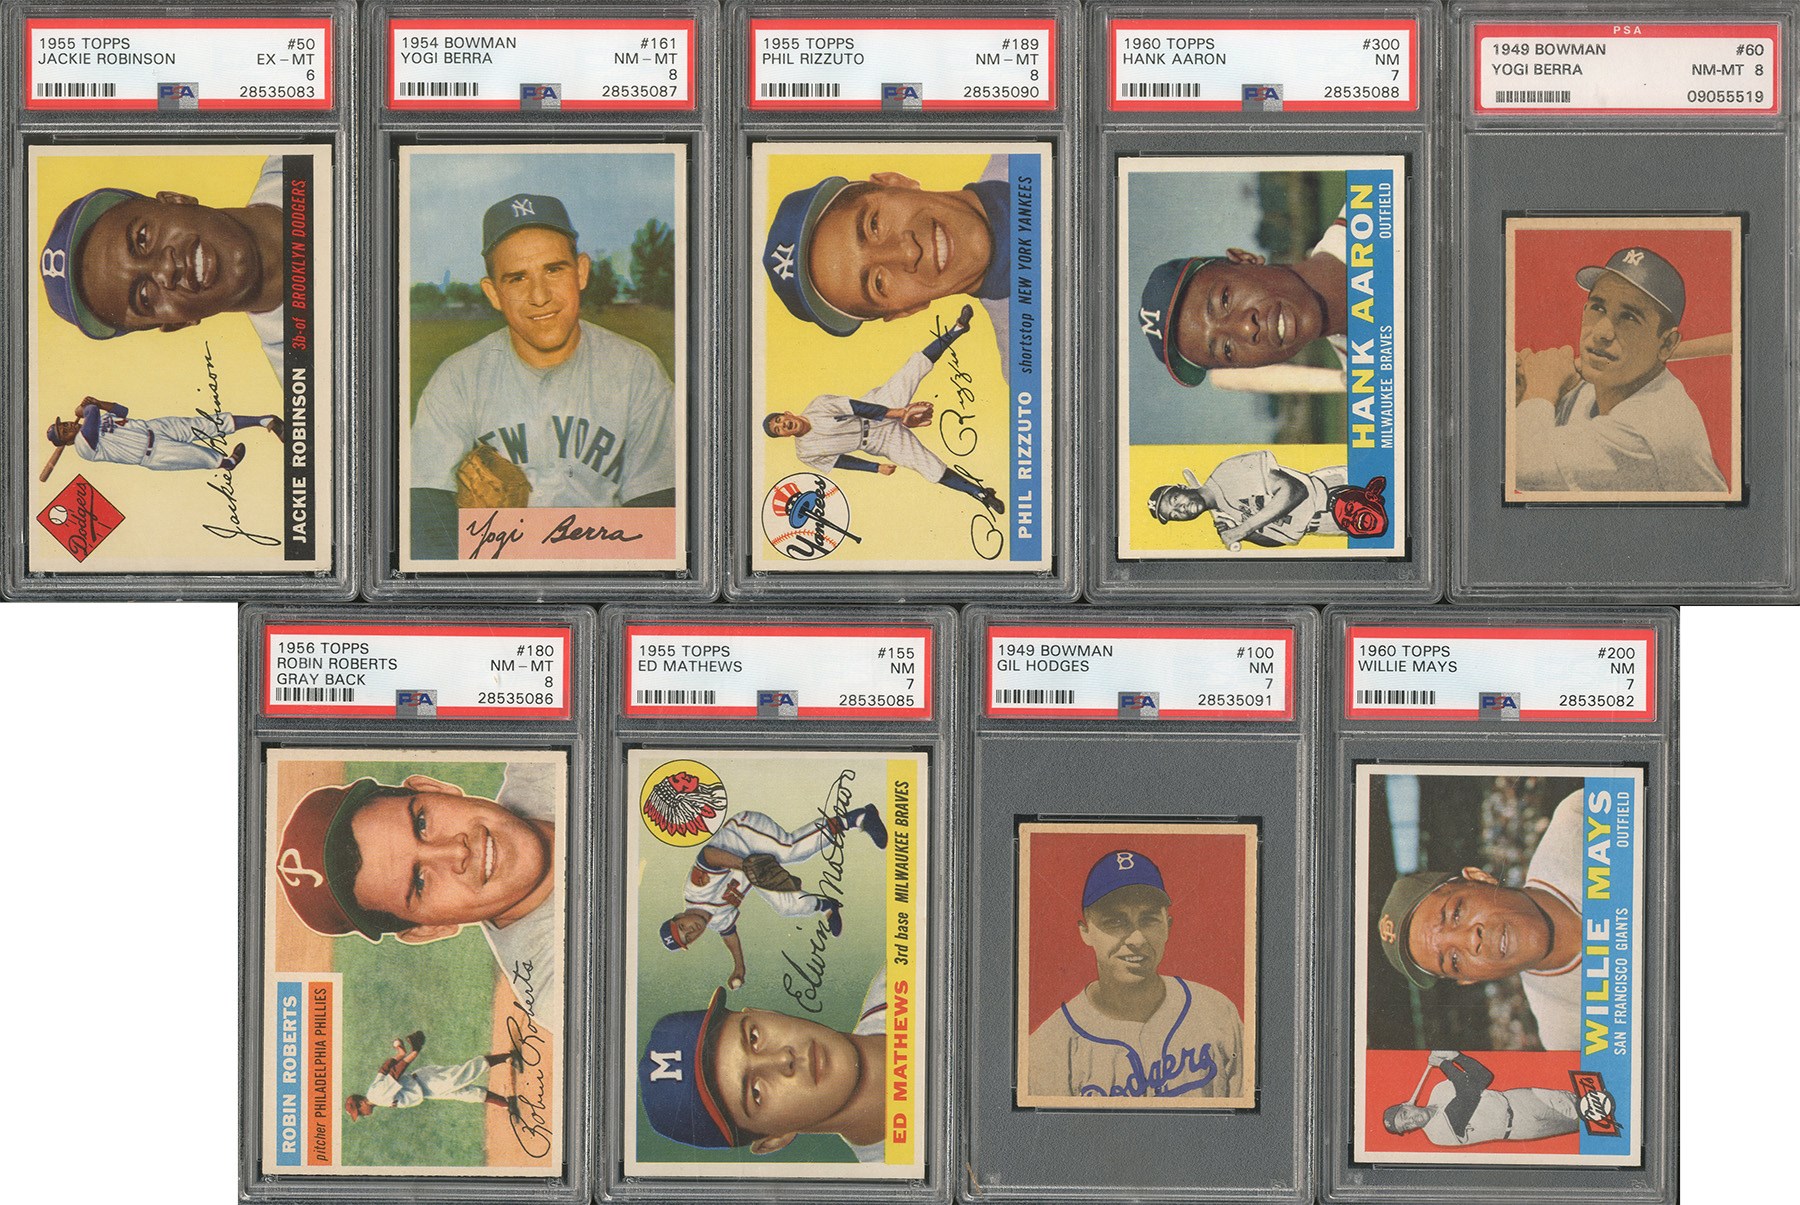 Baseball and Trading Cards - High Grade 1940s-60s Topps & Bowman Star Lot with Robinson, Mantle, Mays, Aaron (15)